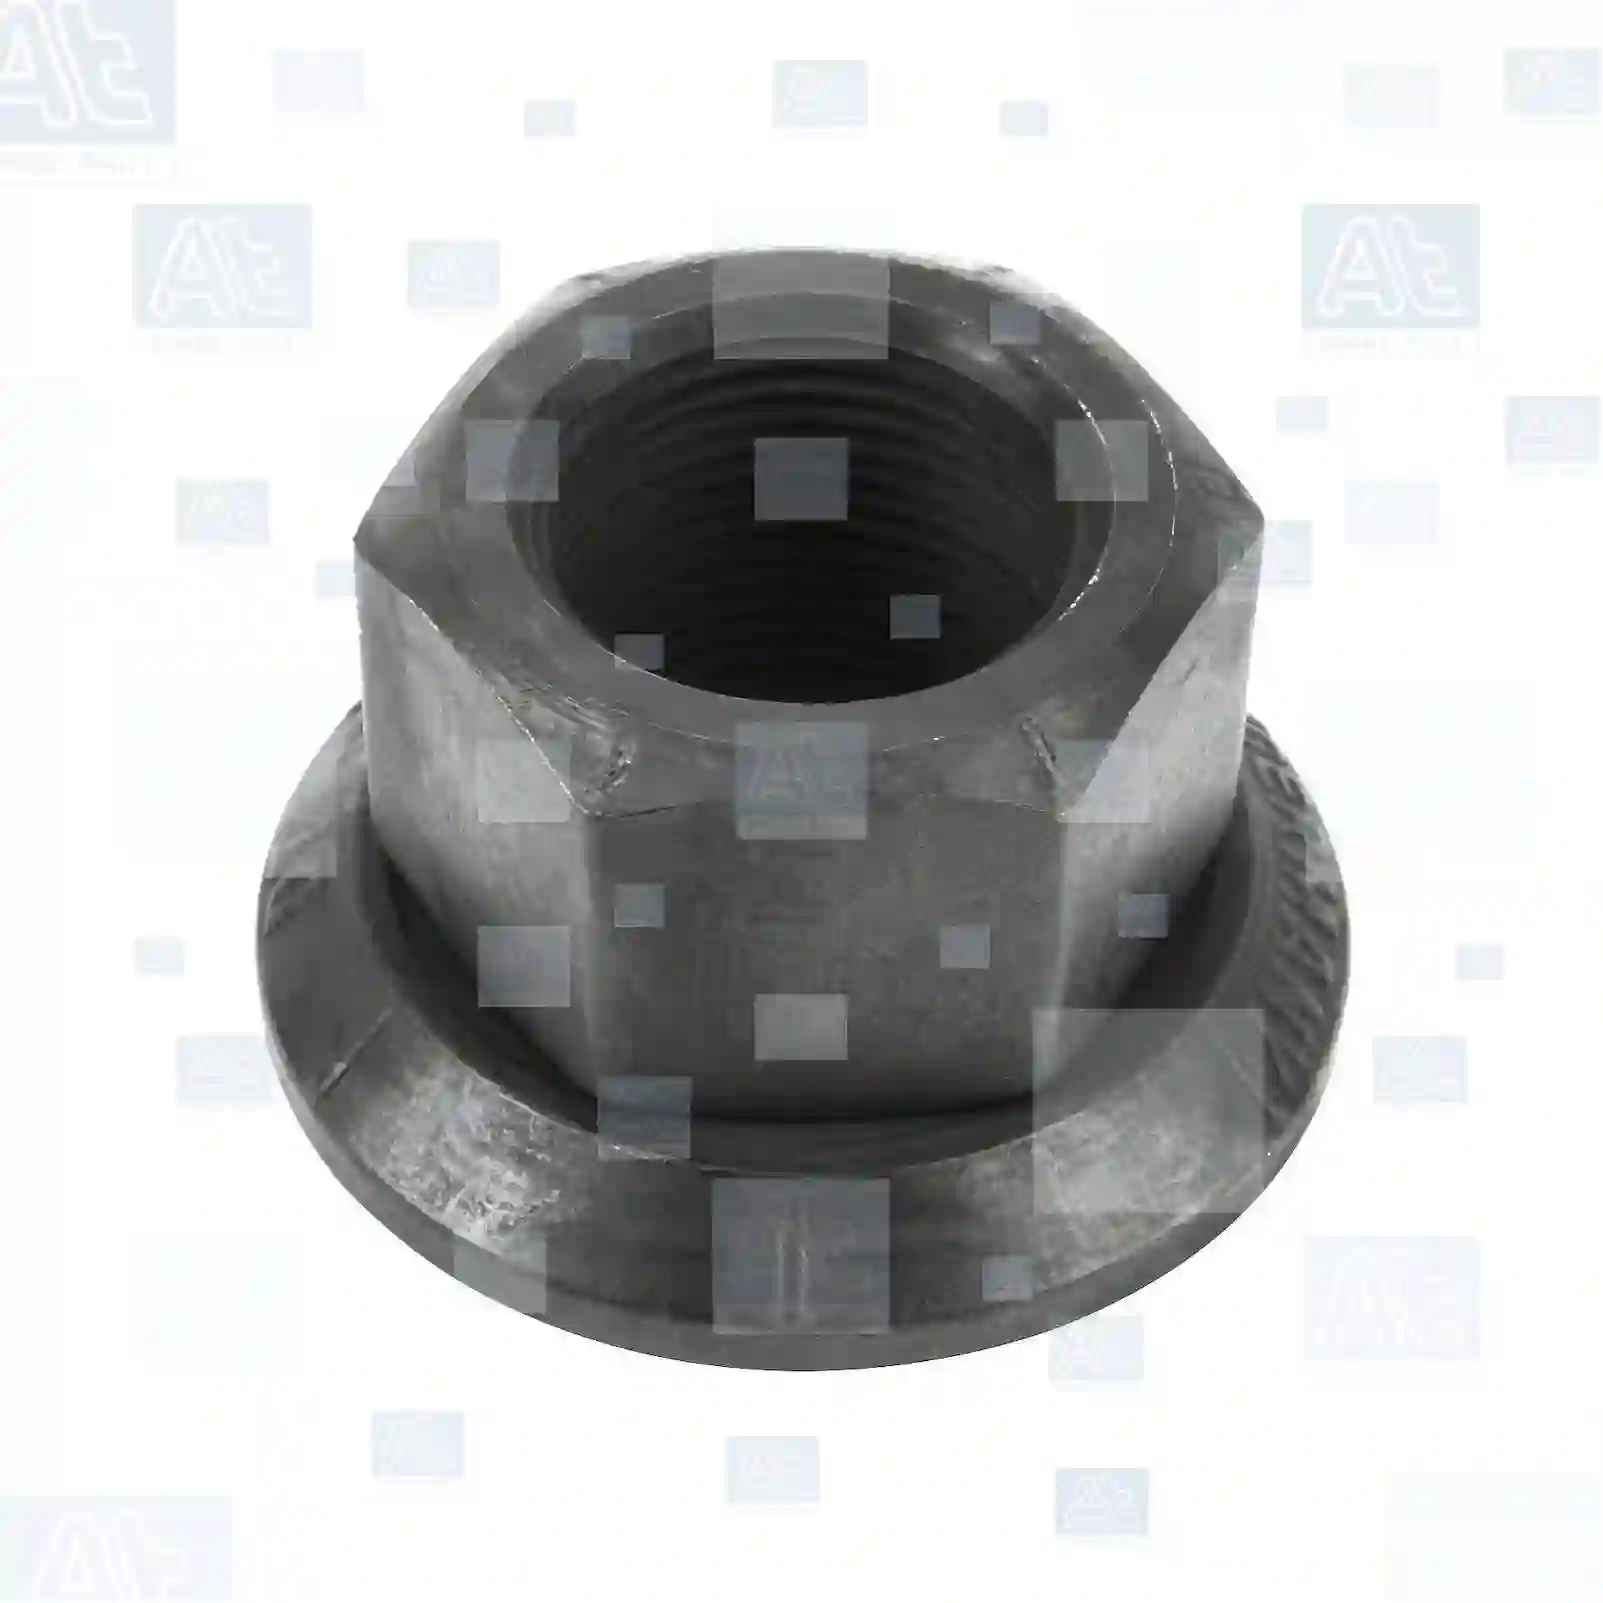 Wheel nut, surface: phosphated, 77726167, 0252192210, 0252192310, 0620652, 0652575, 1241815, 1356737, 1358990, 1402360, 1455046, 1826088, 620652, 652575, 04459603, 41031725, 41036367, 04459603, 41031725, 42117503, 4459603, 81440500123, 81455030001, 81455030026, 81455030049, 81455030056, 3454007024, 3454007124, 3854000124, 6174000024, 21203099, 21218643, 4247301200, 0374361151, 6374361151, 8241999726, 947972, 2V5601295, ZG41978-0008 ||  77726167 At Spare Part | Engine, Accelerator Pedal, Camshaft, Connecting Rod, Crankcase, Crankshaft, Cylinder Head, Engine Suspension Mountings, Exhaust Manifold, Exhaust Gas Recirculation, Filter Kits, Flywheel Housing, General Overhaul Kits, Engine, Intake Manifold, Oil Cleaner, Oil Cooler, Oil Filter, Oil Pump, Oil Sump, Piston & Liner, Sensor & Switch, Timing Case, Turbocharger, Cooling System, Belt Tensioner, Coolant Filter, Coolant Pipe, Corrosion Prevention Agent, Drive, Expansion Tank, Fan, Intercooler, Monitors & Gauges, Radiator, Thermostat, V-Belt / Timing belt, Water Pump, Fuel System, Electronical Injector Unit, Feed Pump, Fuel Filter, cpl., Fuel Gauge Sender,  Fuel Line, Fuel Pump, Fuel Tank, Injection Line Kit, Injection Pump, Exhaust System, Clutch & Pedal, Gearbox, Propeller Shaft, Axles, Brake System, Hubs & Wheels, Suspension, Leaf Spring, Universal Parts / Accessories, Steering, Electrical System, Cabin Wheel nut, surface: phosphated, 77726167, 0252192210, 0252192310, 0620652, 0652575, 1241815, 1356737, 1358990, 1402360, 1455046, 1826088, 620652, 652575, 04459603, 41031725, 41036367, 04459603, 41031725, 42117503, 4459603, 81440500123, 81455030001, 81455030026, 81455030049, 81455030056, 3454007024, 3454007124, 3854000124, 6174000024, 21203099, 21218643, 4247301200, 0374361151, 6374361151, 8241999726, 947972, 2V5601295, ZG41978-0008 ||  77726167 At Spare Part | Engine, Accelerator Pedal, Camshaft, Connecting Rod, Crankcase, Crankshaft, Cylinder Head, Engine Suspension Mountings, Exhaust Manifold, Exhaust Gas Recirculation, Filter Kits, Flywheel Housing, General Overhaul Kits, Engine, Intake Manifold, Oil Cleaner, Oil Cooler, Oil Filter, Oil Pump, Oil Sump, Piston & Liner, Sensor & Switch, Timing Case, Turbocharger, Cooling System, Belt Tensioner, Coolant Filter, Coolant Pipe, Corrosion Prevention Agent, Drive, Expansion Tank, Fan, Intercooler, Monitors & Gauges, Radiator, Thermostat, V-Belt / Timing belt, Water Pump, Fuel System, Electronical Injector Unit, Feed Pump, Fuel Filter, cpl., Fuel Gauge Sender,  Fuel Line, Fuel Pump, Fuel Tank, Injection Line Kit, Injection Pump, Exhaust System, Clutch & Pedal, Gearbox, Propeller Shaft, Axles, Brake System, Hubs & Wheels, Suspension, Leaf Spring, Universal Parts / Accessories, Steering, Electrical System, Cabin